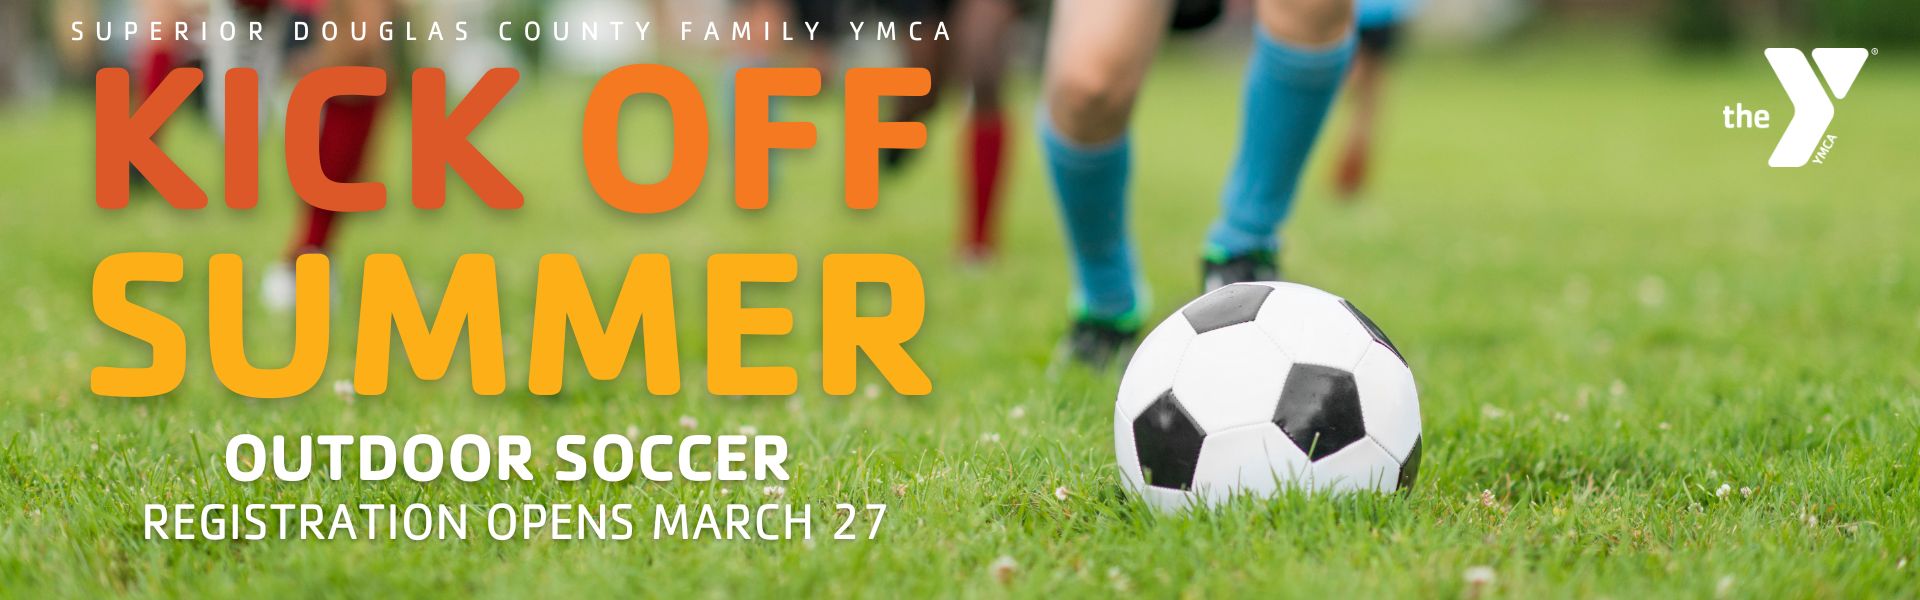 YOUTH OUTDOOR SOCCER